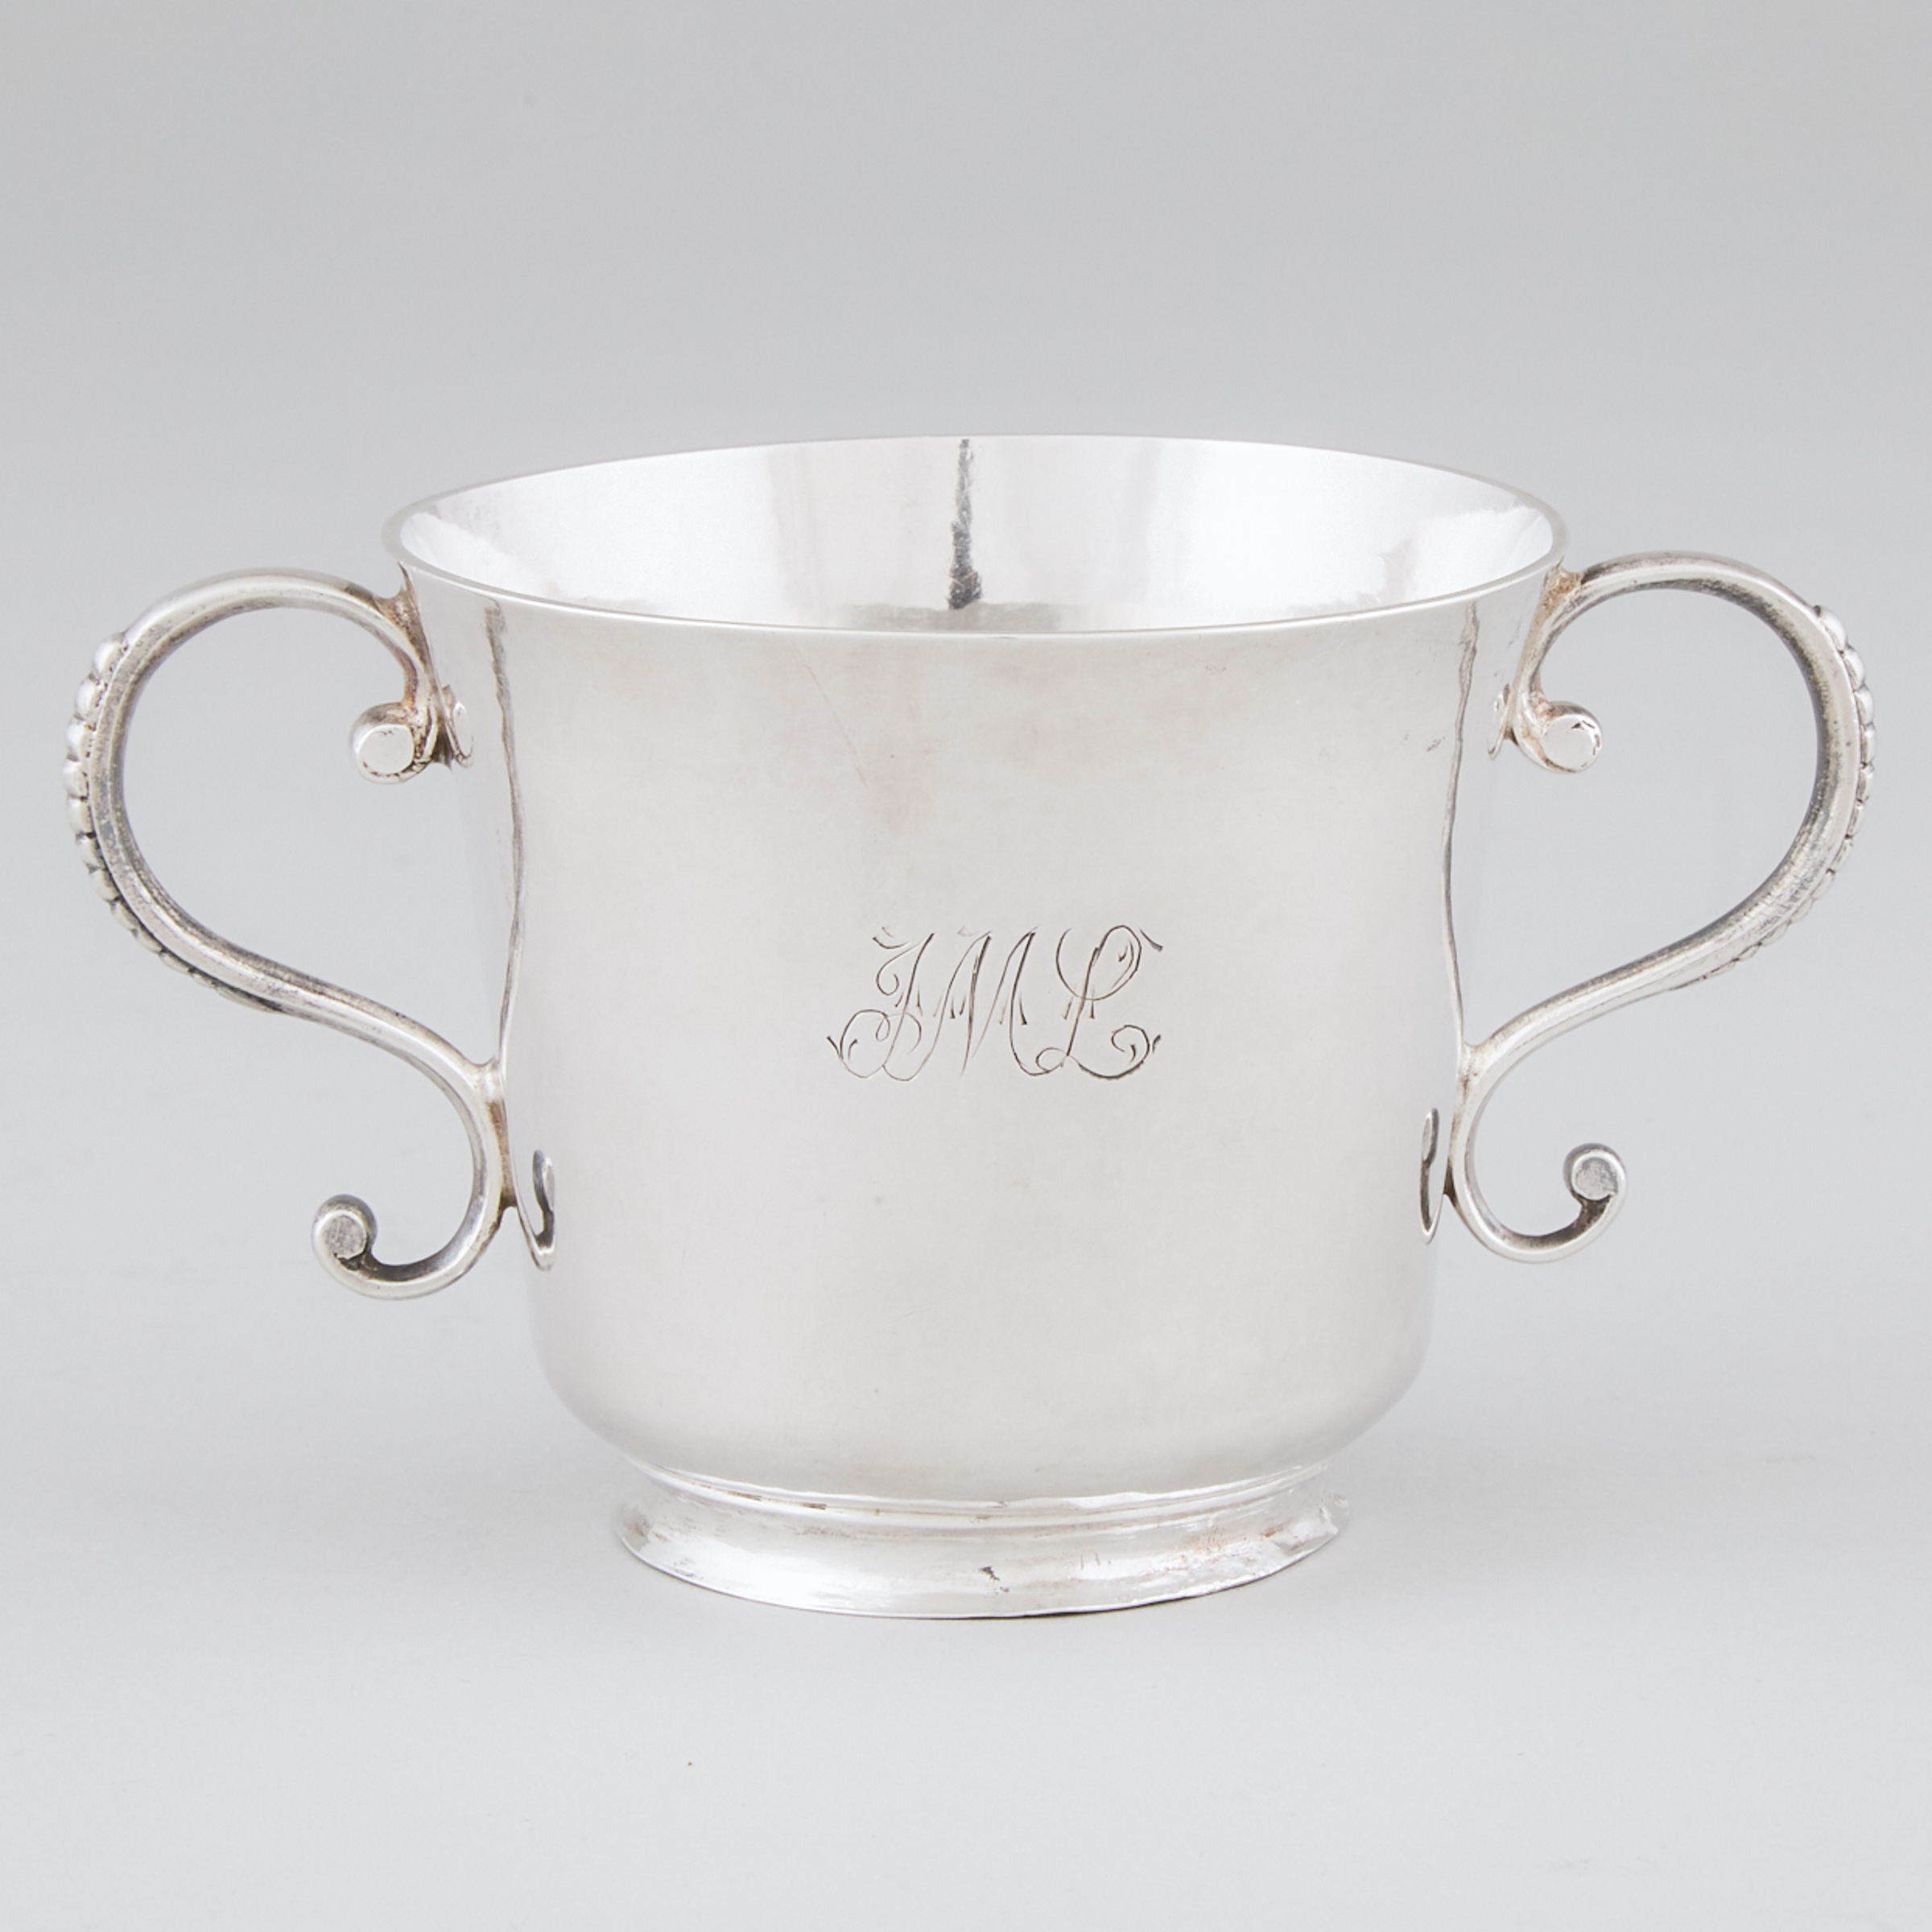 Channel Islands Silver Two-Handled Christening Cup, maker's mark IA, crown above, Guernsey, c.1766